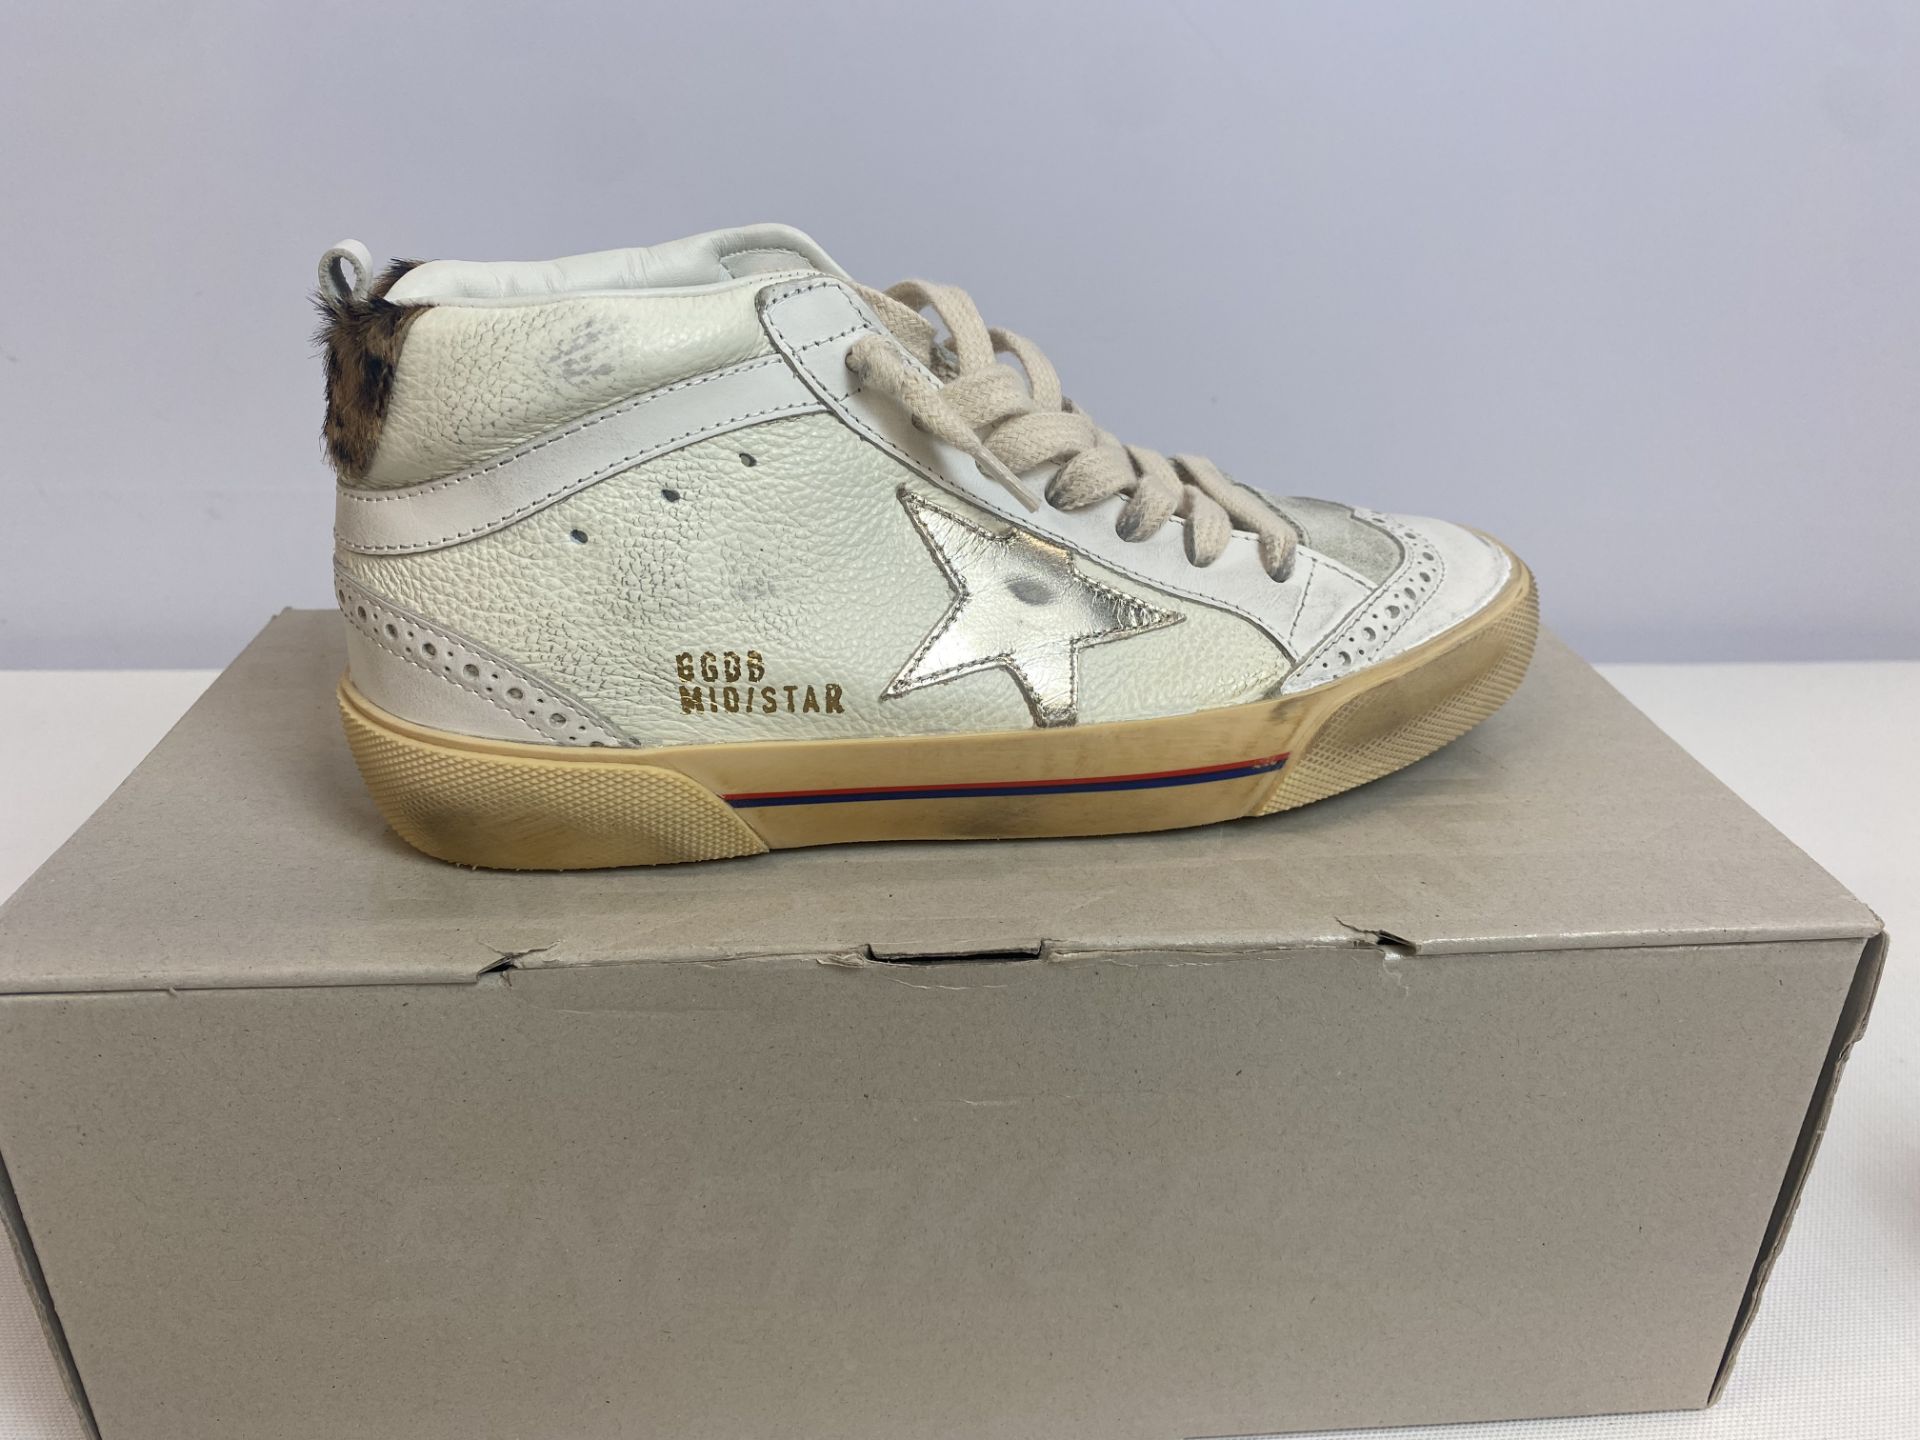 Golden Goose SNKR MIDSTAR SIMID STAR CLASSIC, Size: 36, Color: WHITE, Retail Price: $600 - Image 3 of 4